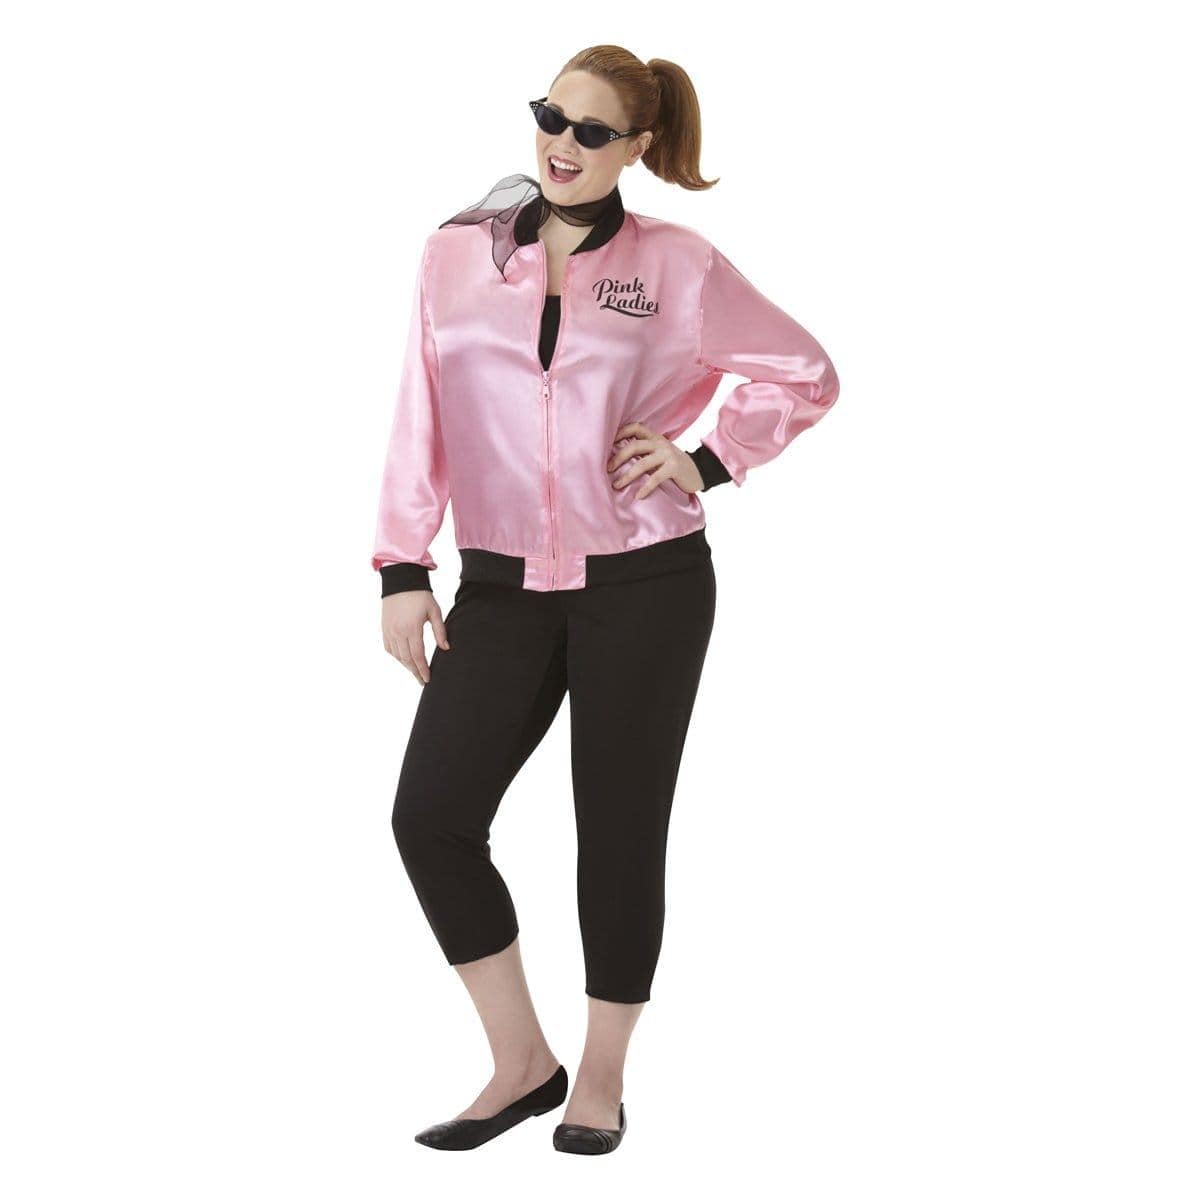 Buy Costumes Greaser Babe Costume for Plus Size Adults sold at Party Expert